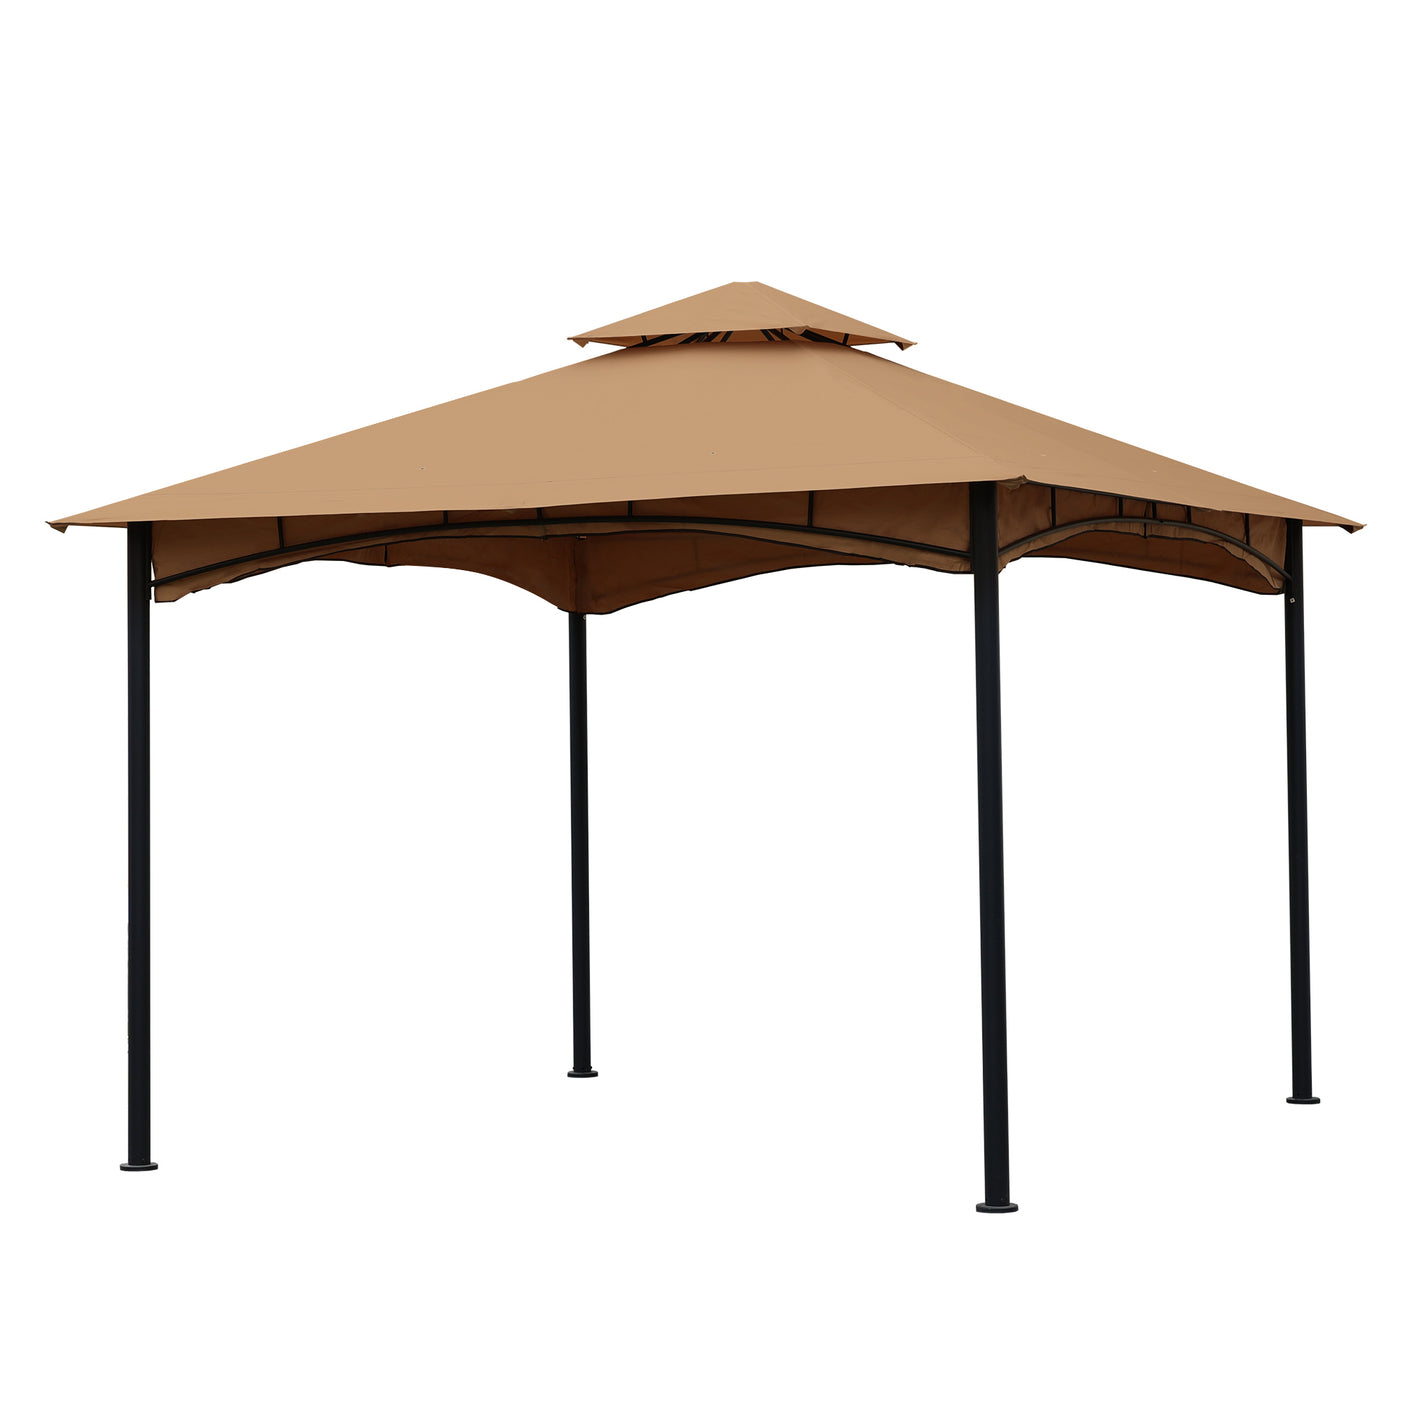 11x11 Ft Outdoor Patio Square Steel Gazebo Canopy With Double Roof For Lawn, Garden, Backyard